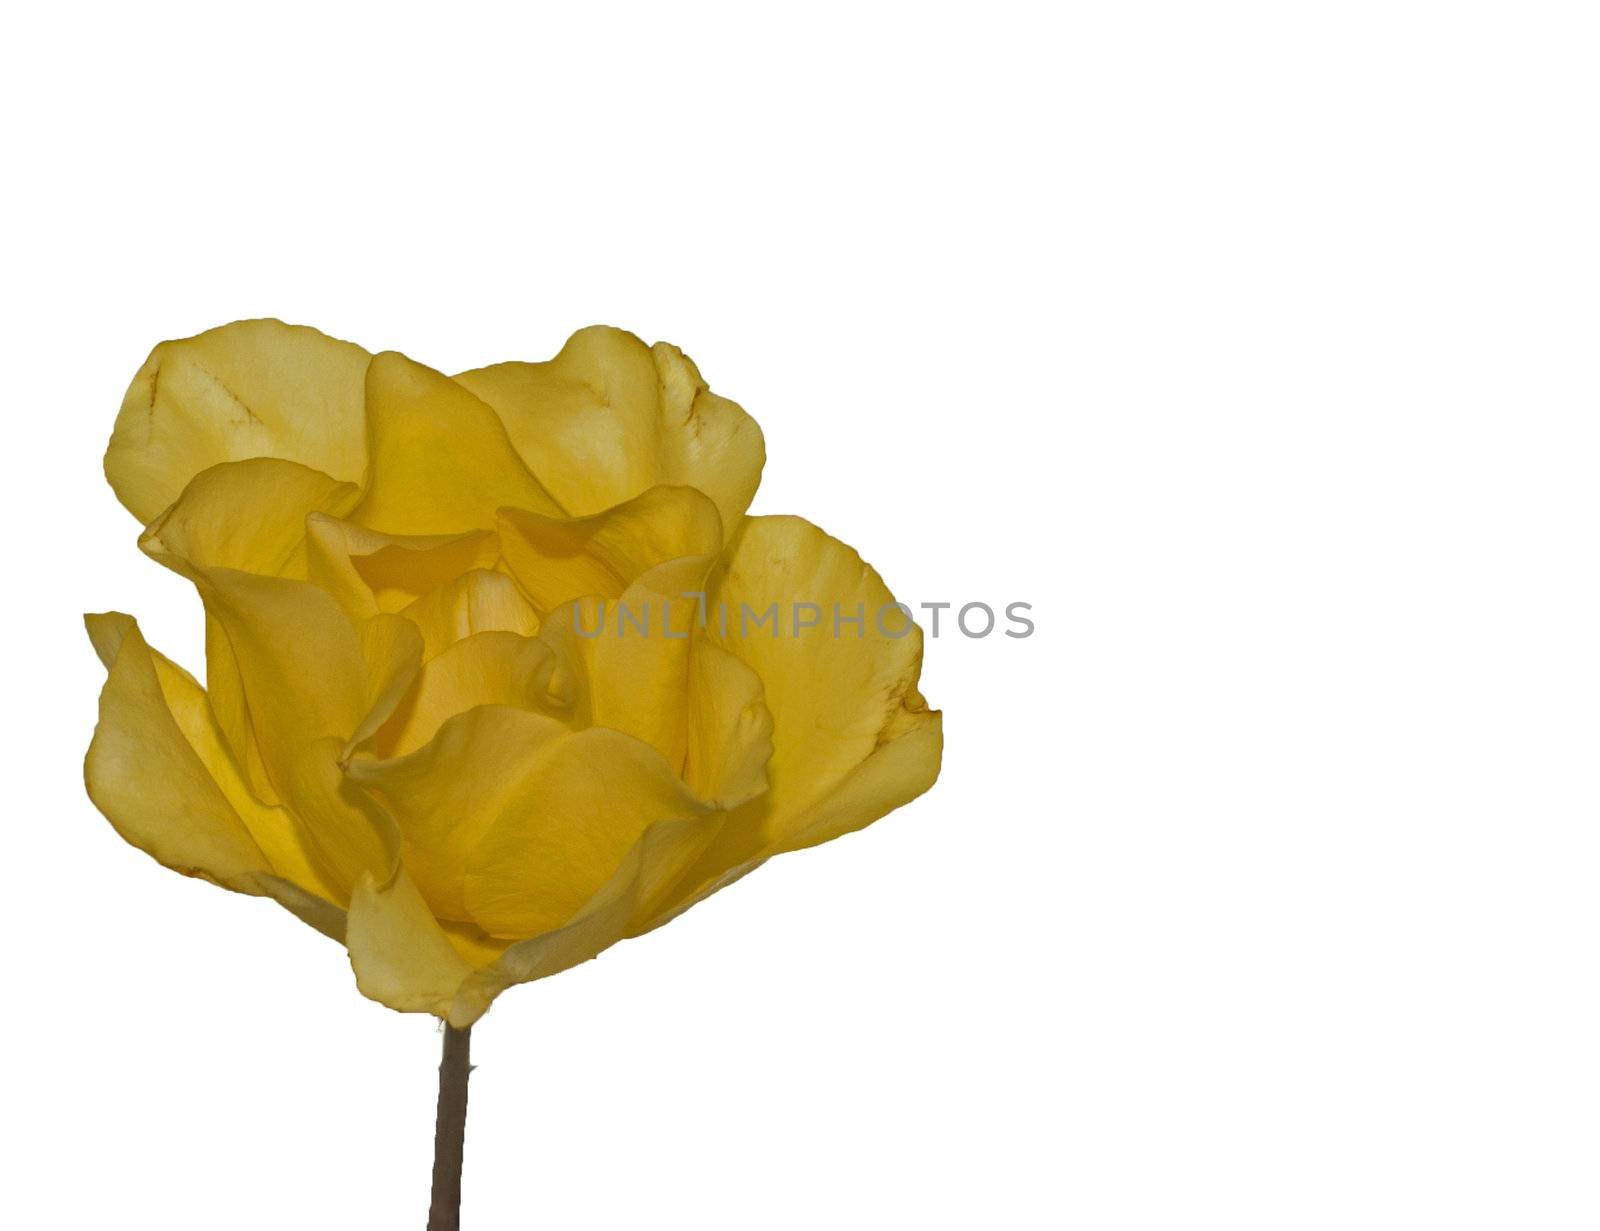 yellow rose by compuinfoto